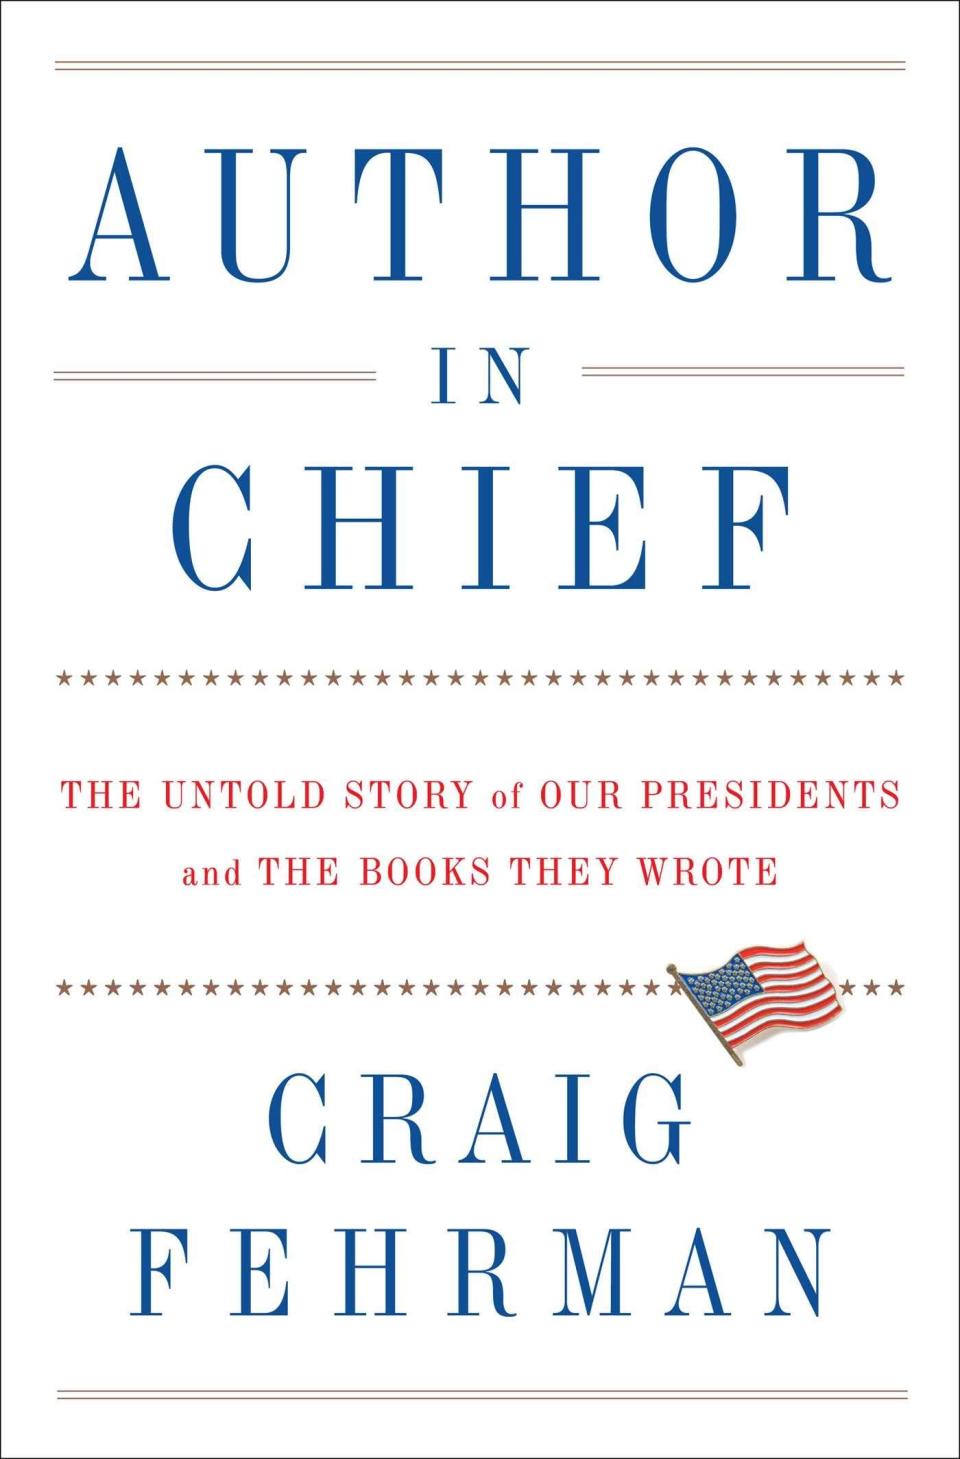 “Author in Chief: The Untold Story of Our Presidents and the Books They Wrote” by Craig Fehrman. It’s available now through major booksellers, as well as locally at the Book Corner, 100 N. Walnut St.